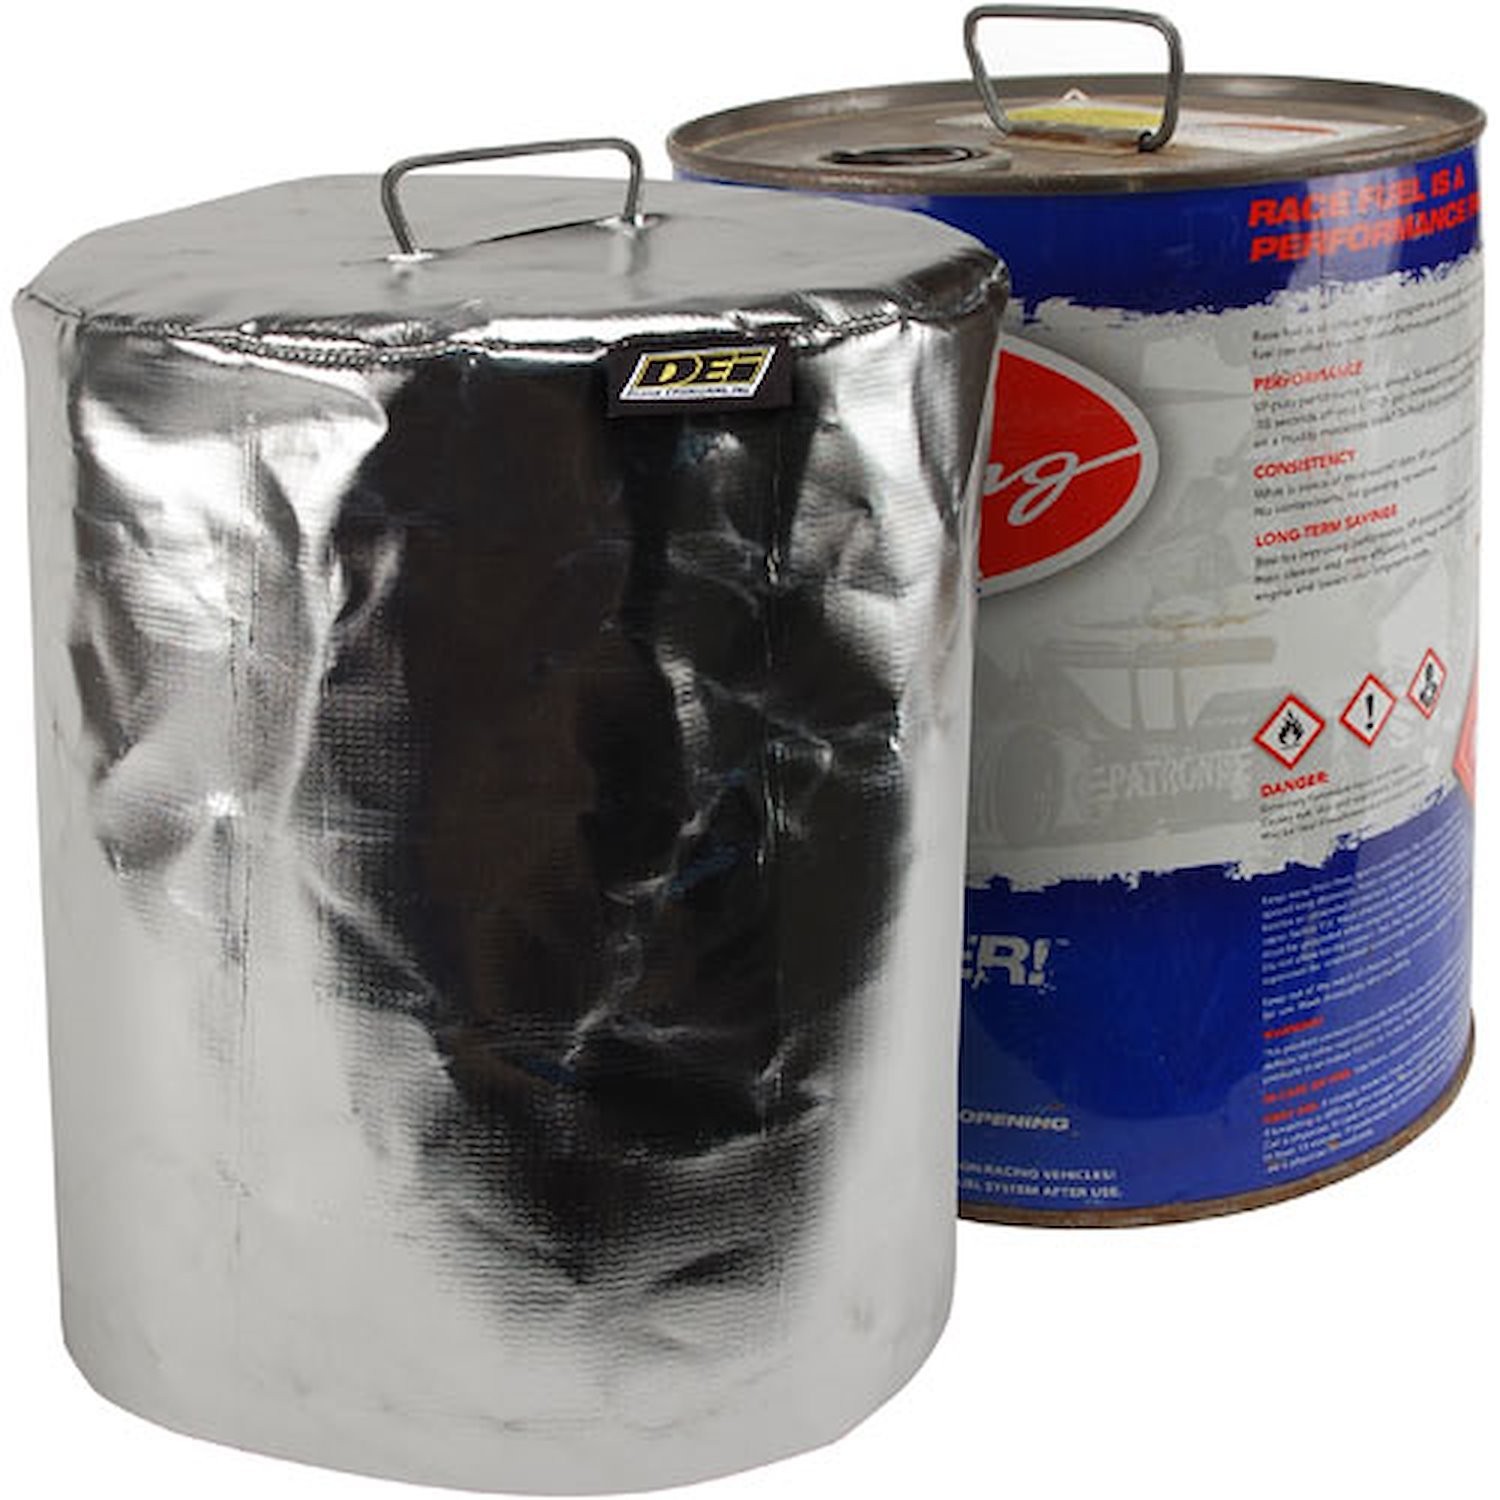 Reflective Fuel Can Cover Fits Standard 5 Gallon